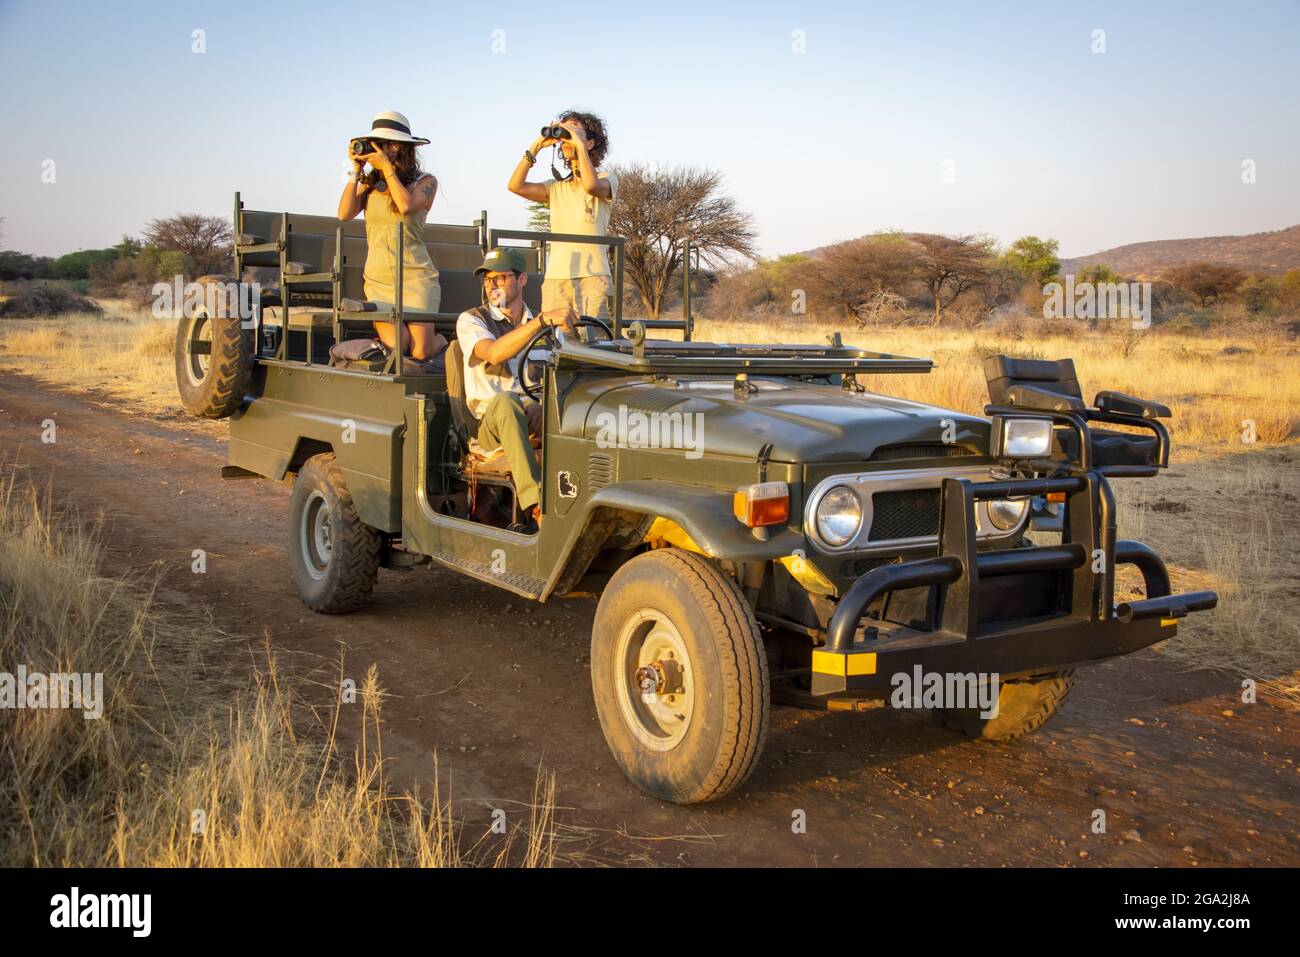 Women in a jeep, one using binoculars and one using a camera, looking into the savanna with a driver sitting behind the wheel while on safari at th... Stock Photo